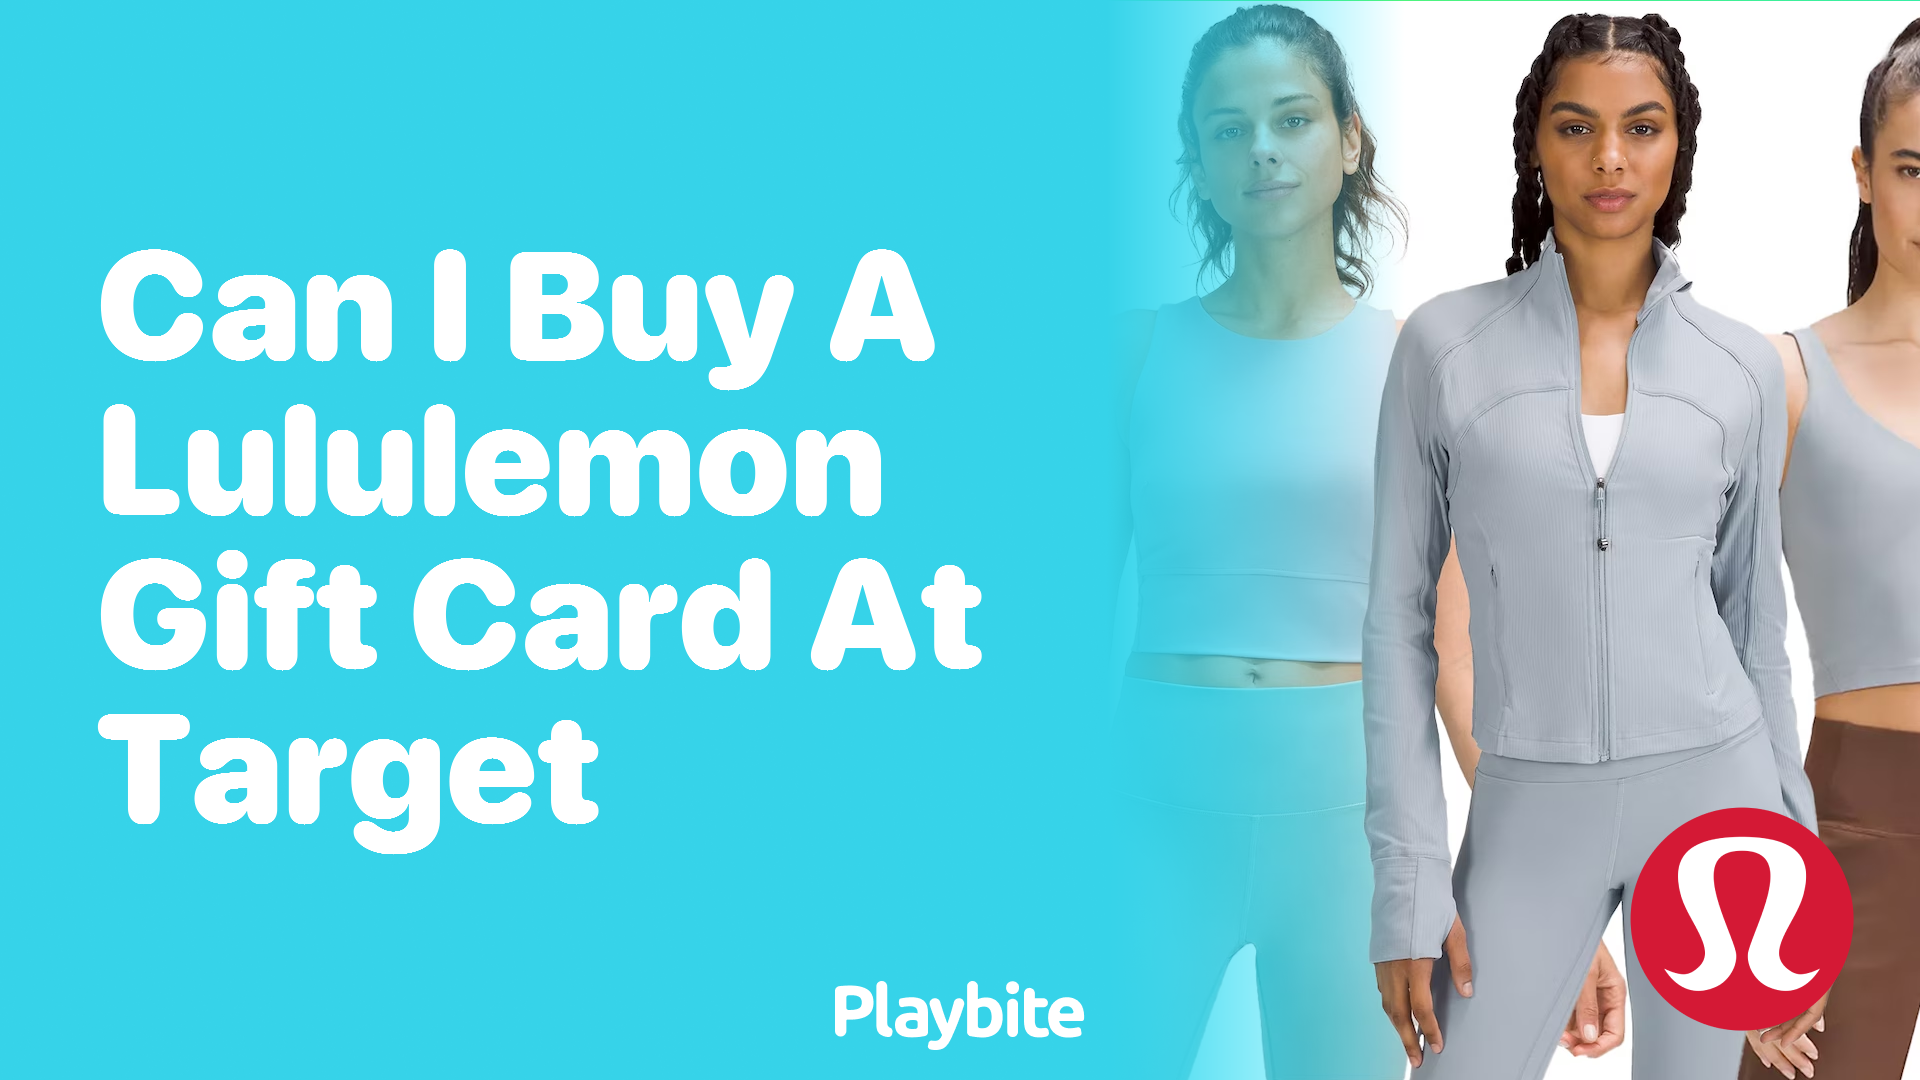 Can I Buy a Lululemon Gift Card at Target? - Playbite